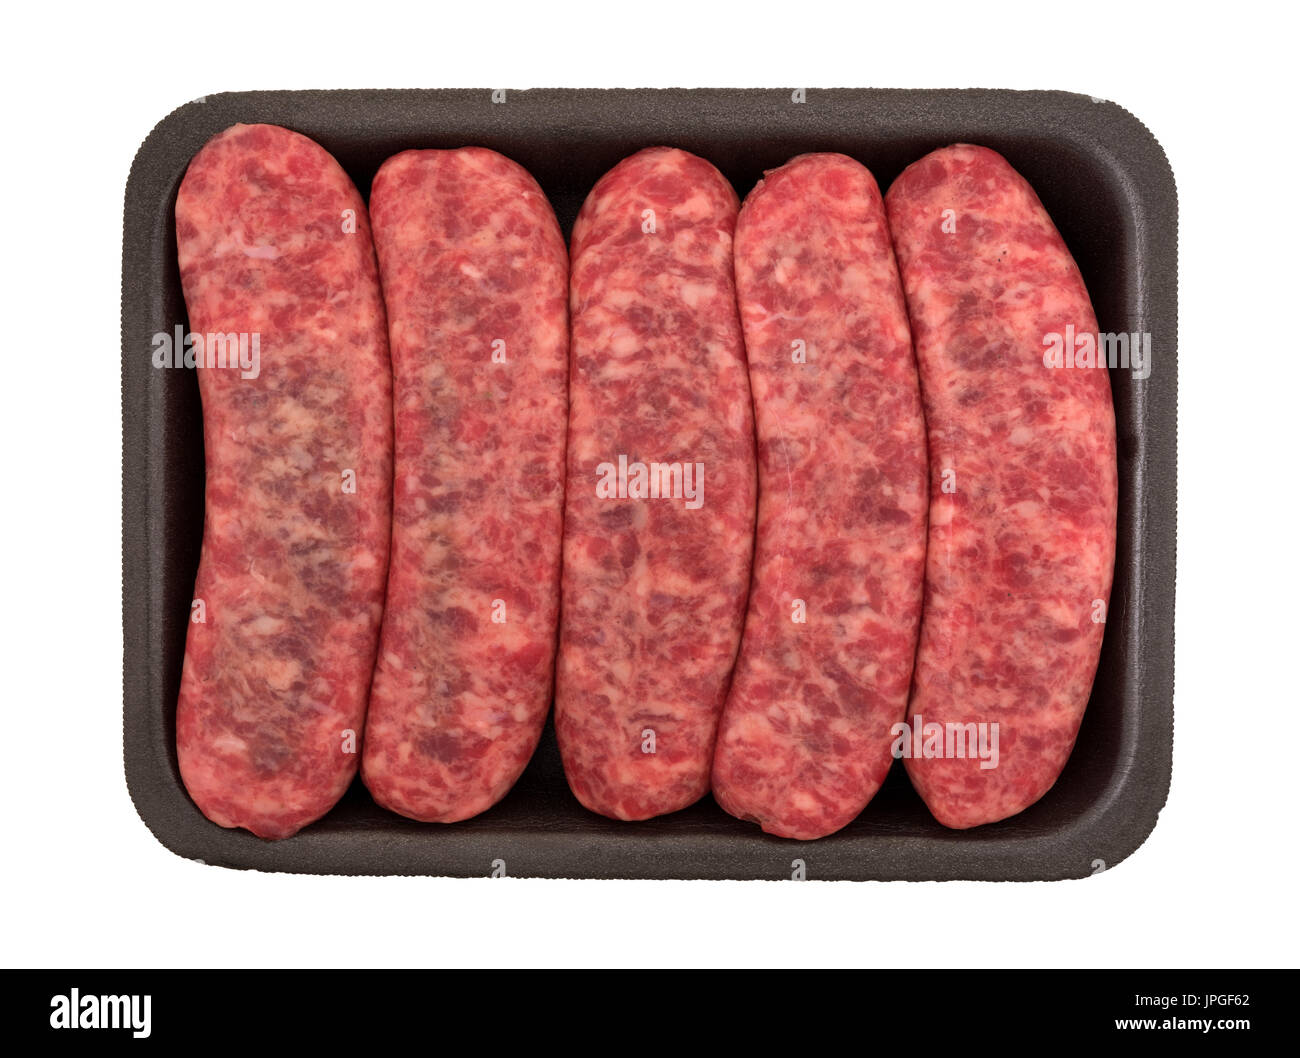 Top view of mild bratwurst sausages in a black foam butchers tray isolated on a white background. Stock Photo